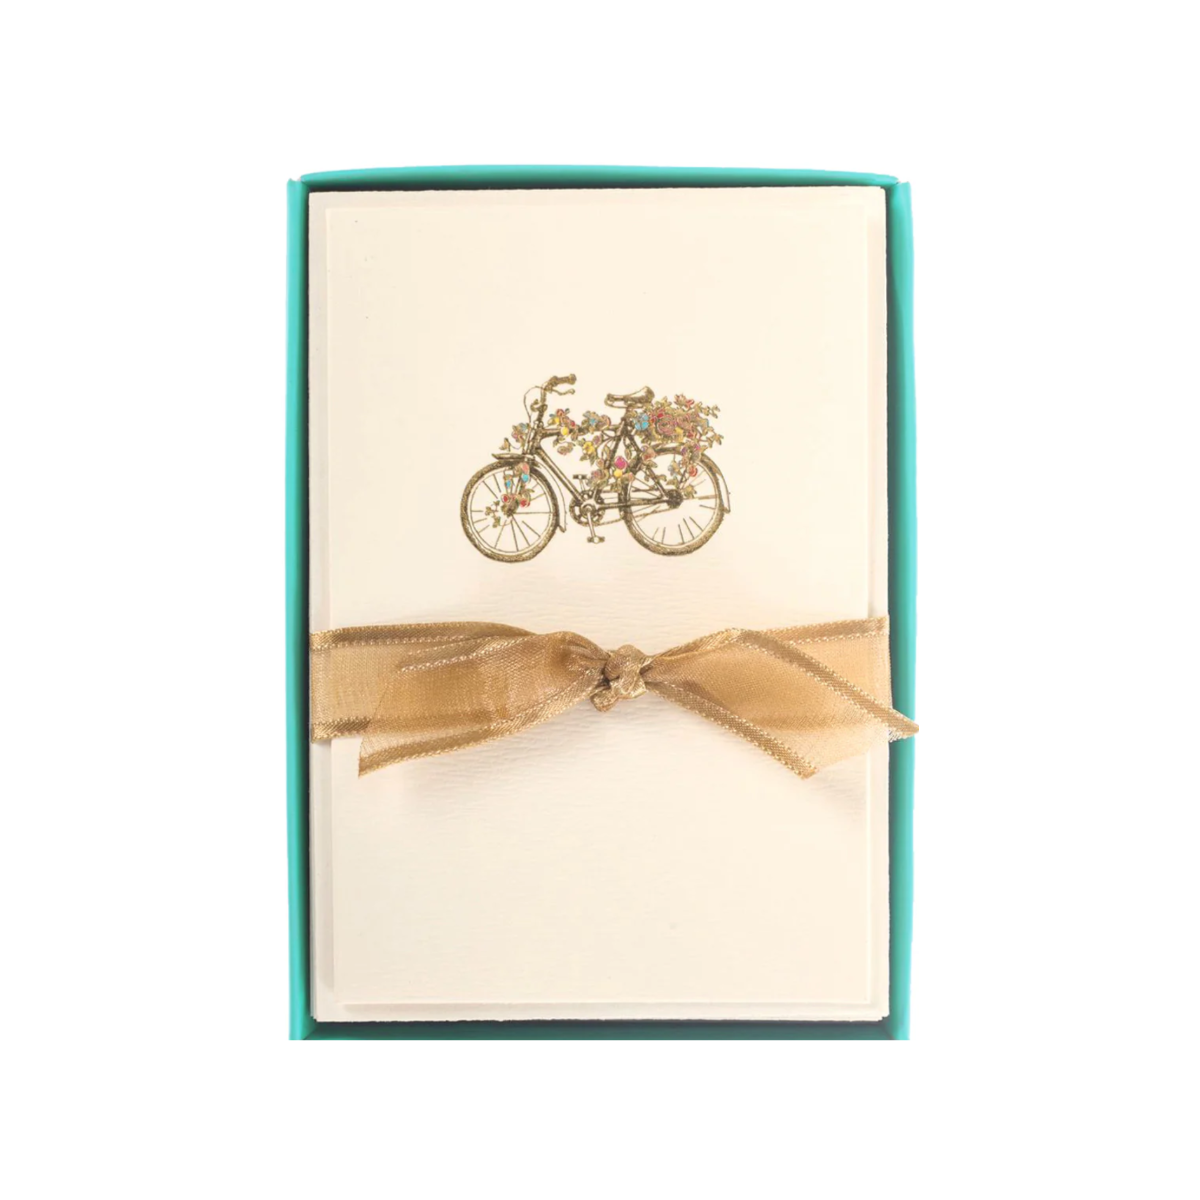 Flower Bicycle Boxed Set by Graphique